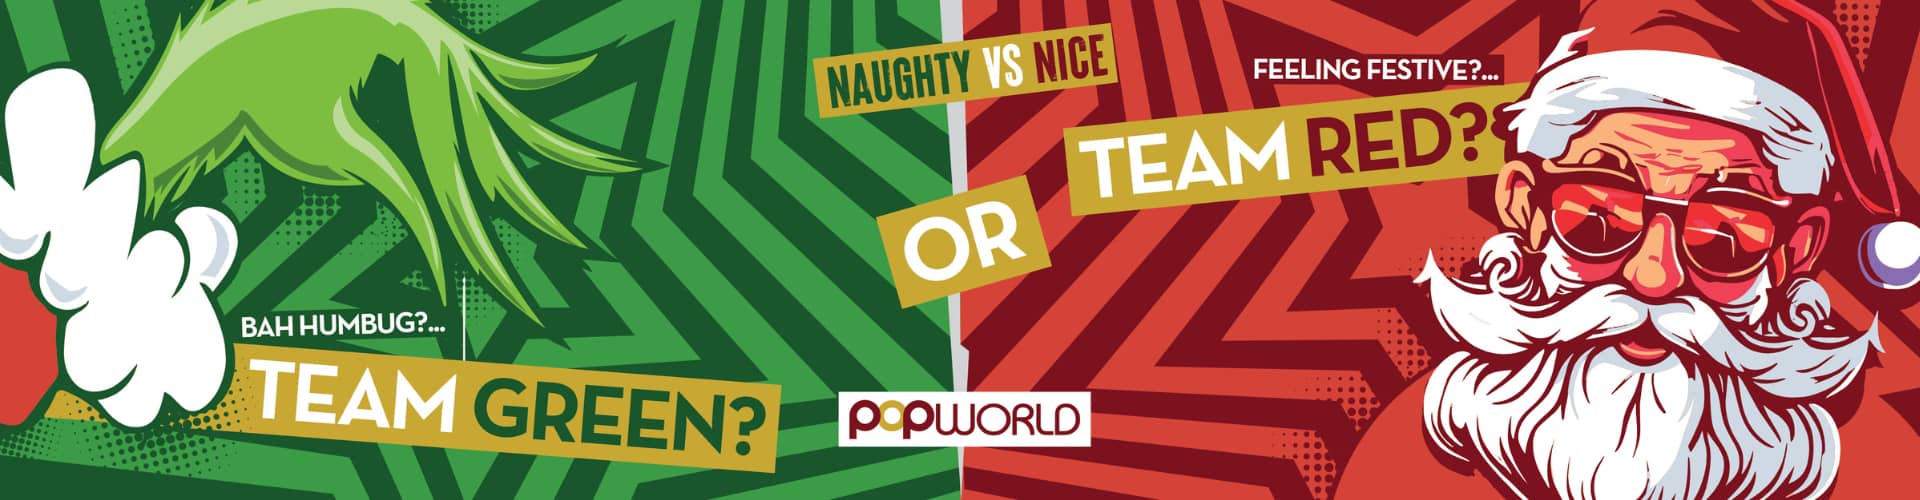 Popworld Sheffield - Naughty vs Nice - Are you Team Green or Team Red?